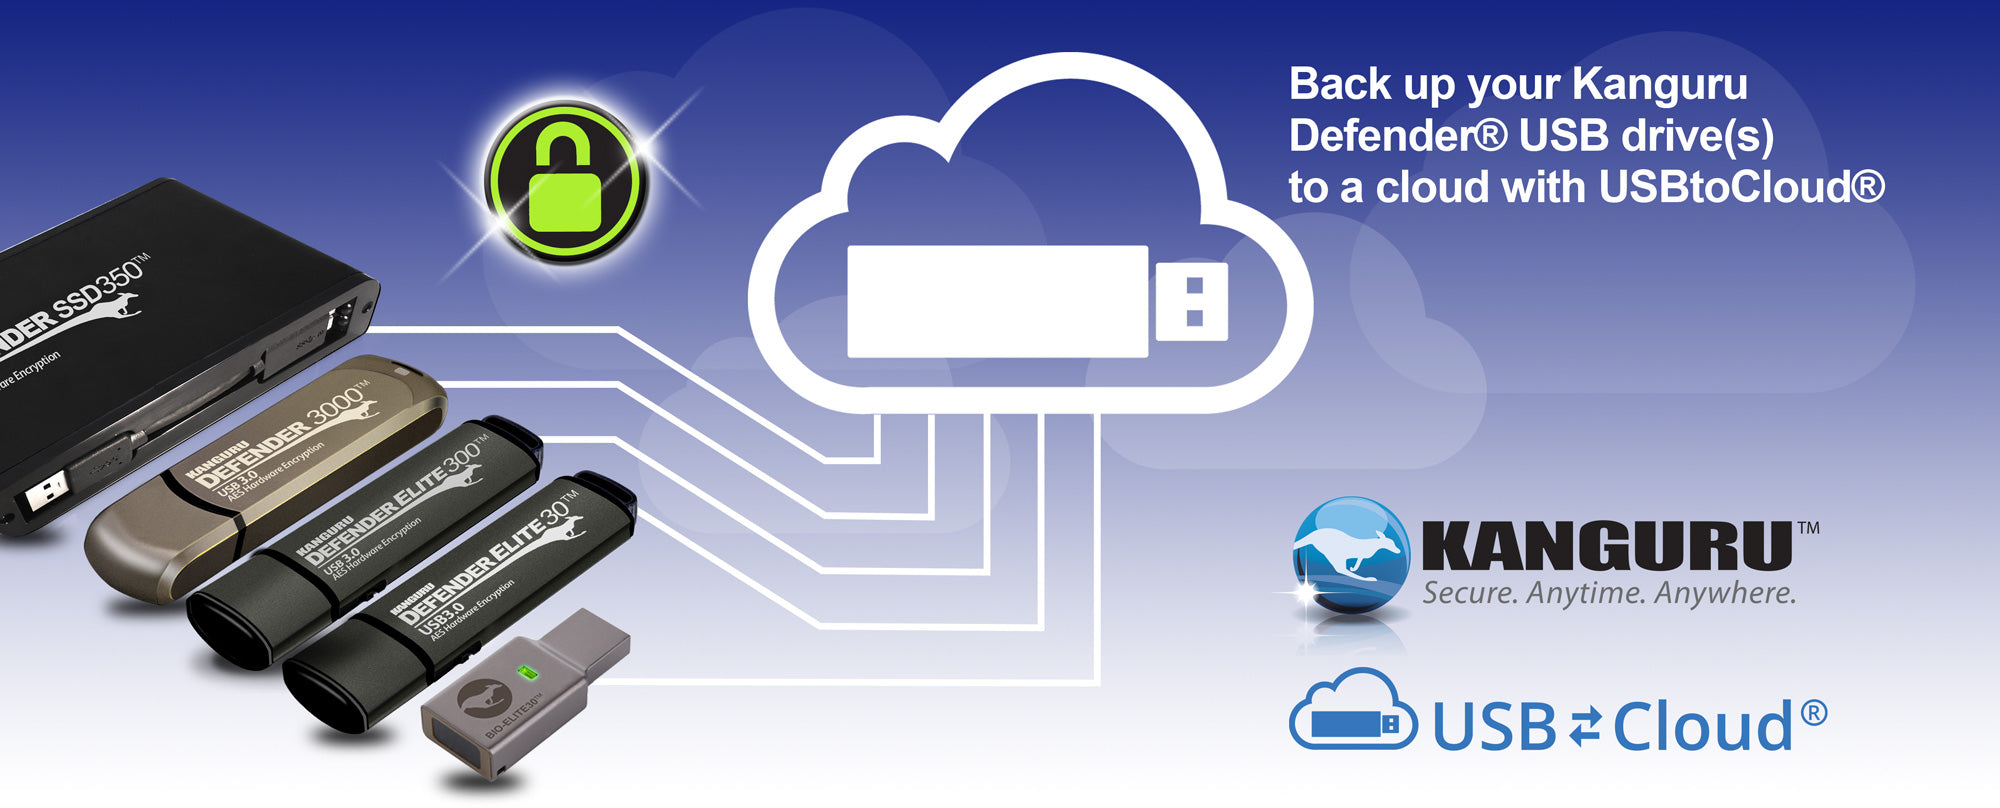 Kanguru Expands Its Product Line with New USBtoCloud® Backup Option For Defender® Hardware Encrypted USB Drives